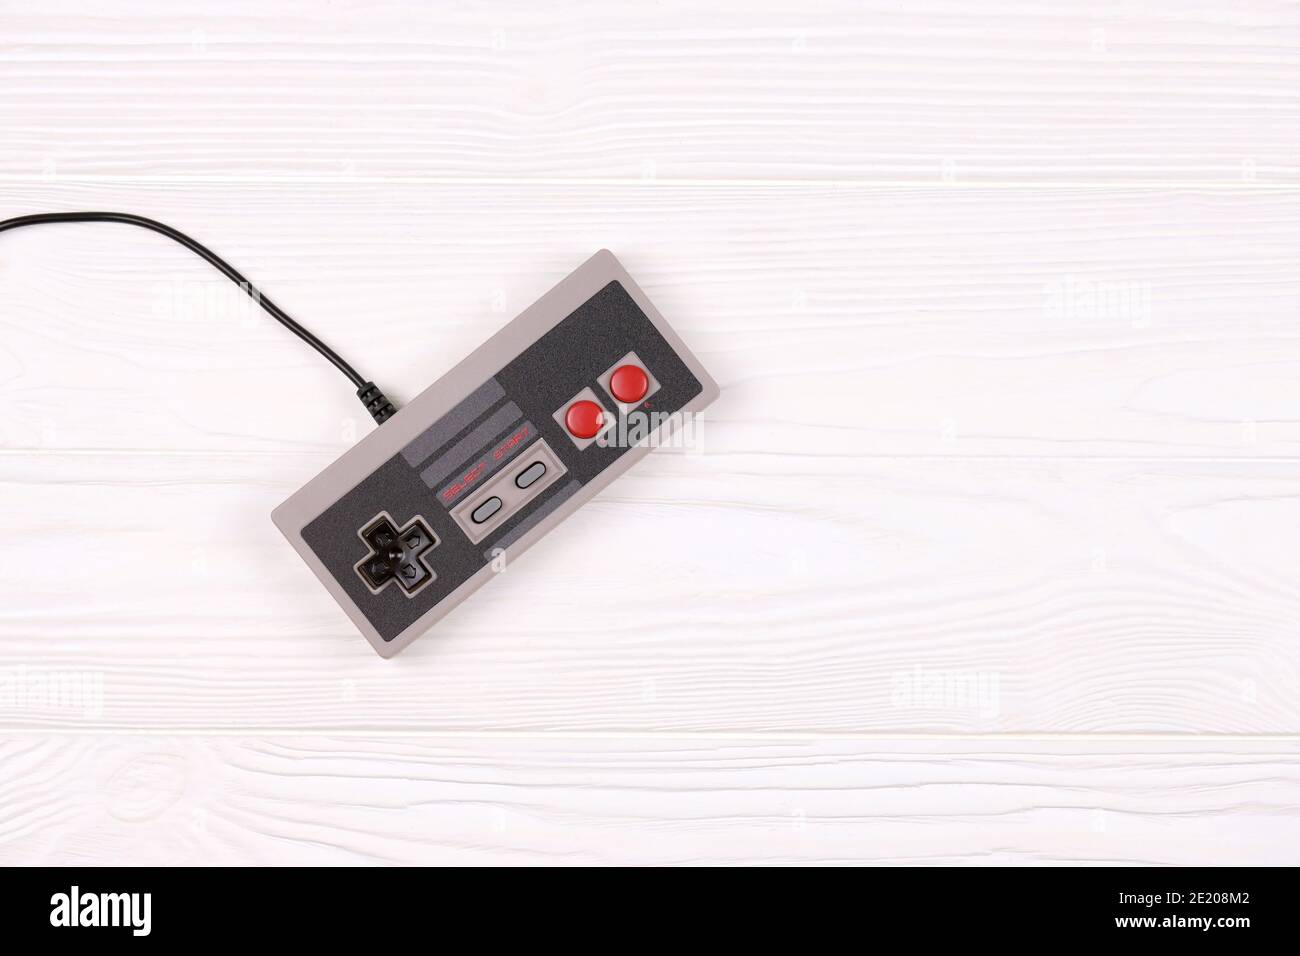 KHARKOV, UKRAINE - DECEMBER 27, 2020: Old gamepad for 8-bit video game console nintendo entertainment system and nes mini on white wooden table. Old s Stock Photo